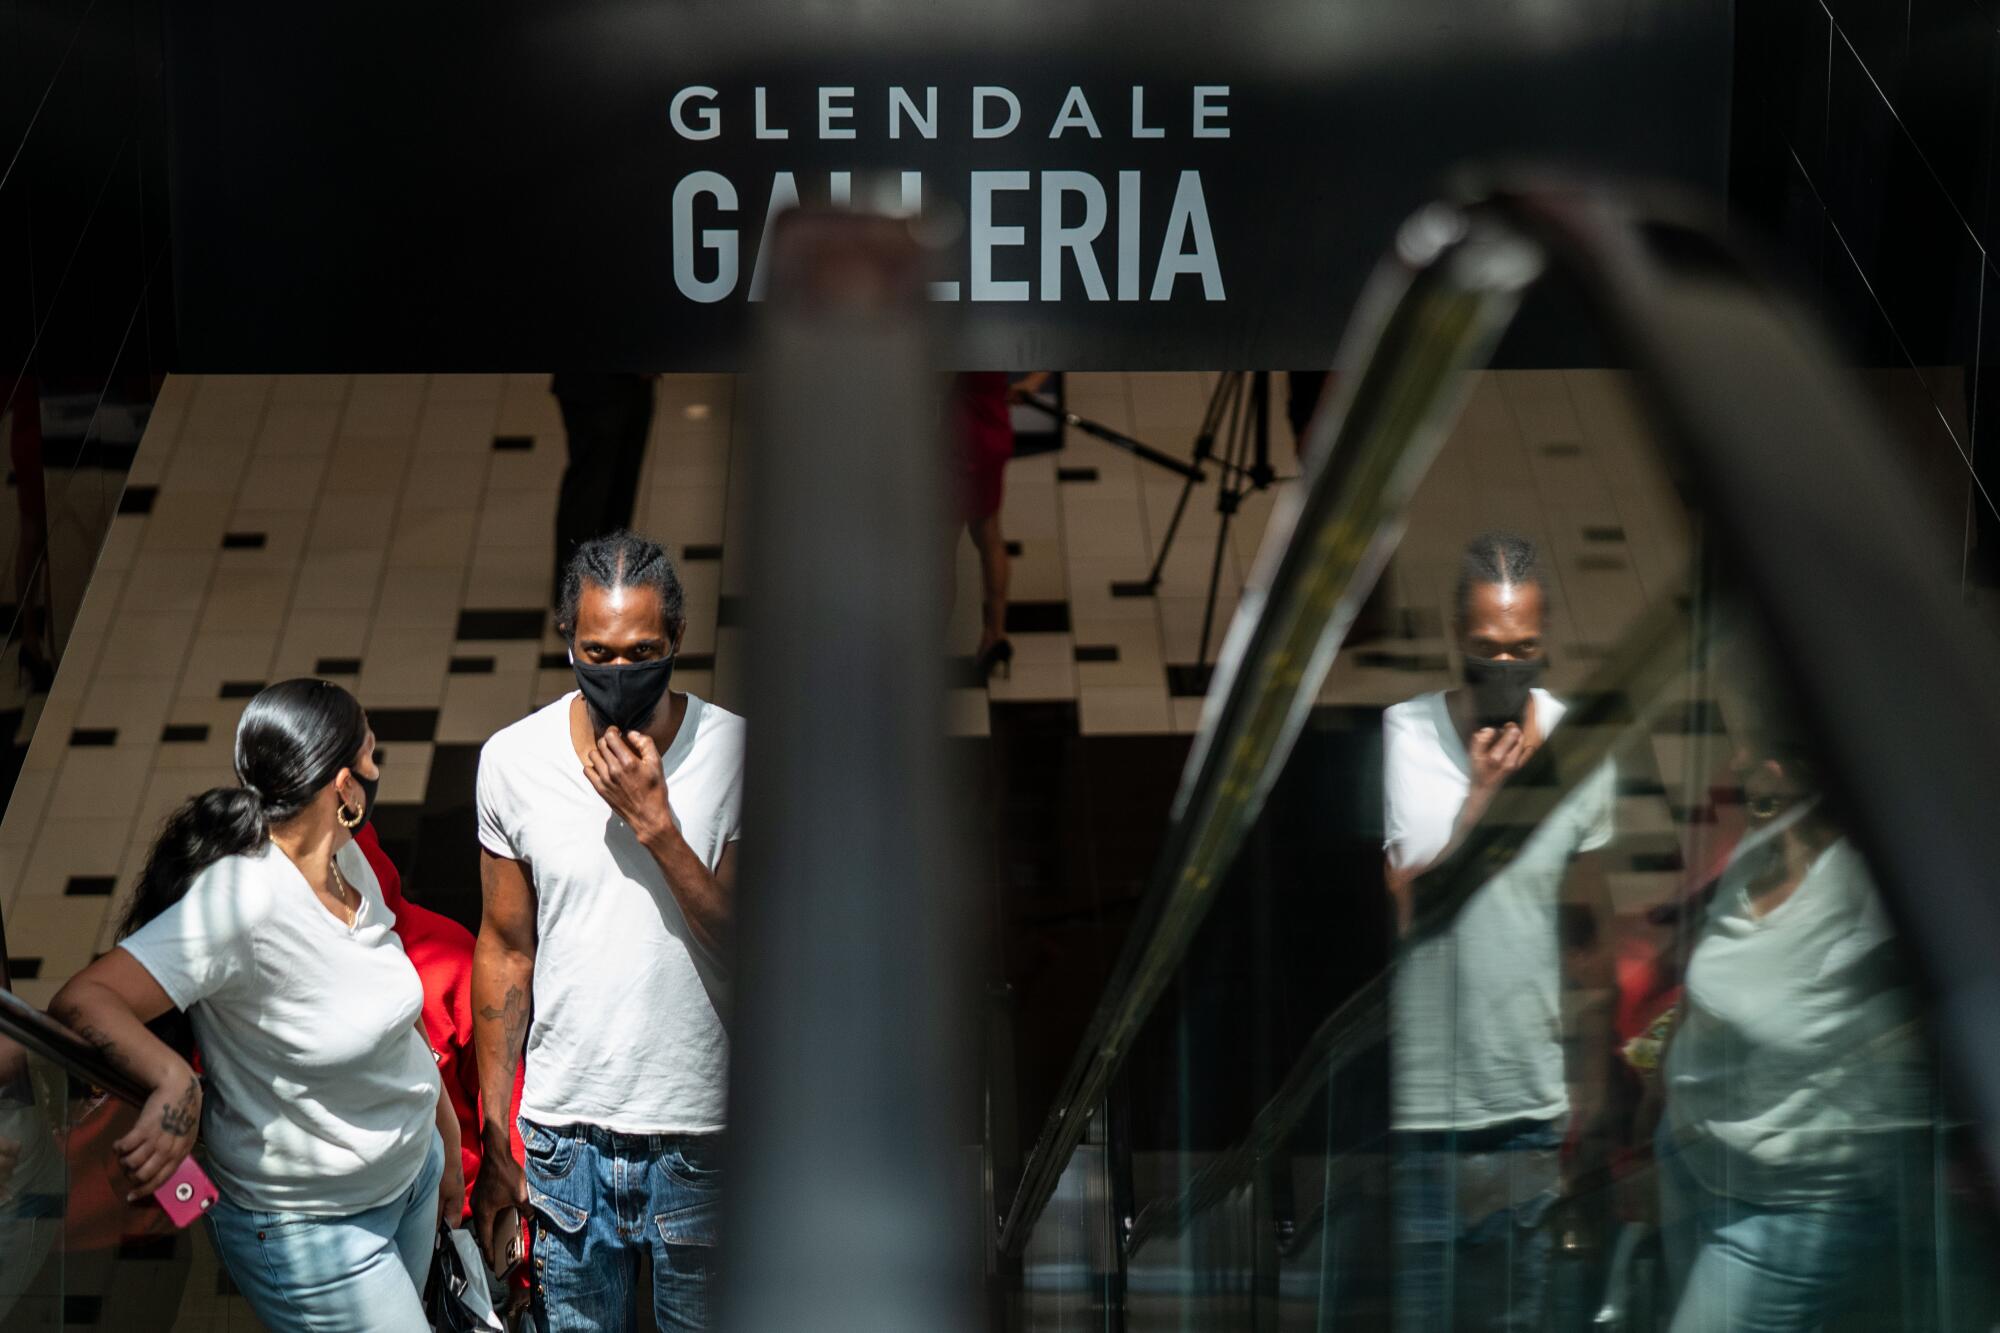 Wearing masks face covering and practicing social distancing, people wander the Glendale Galleria.